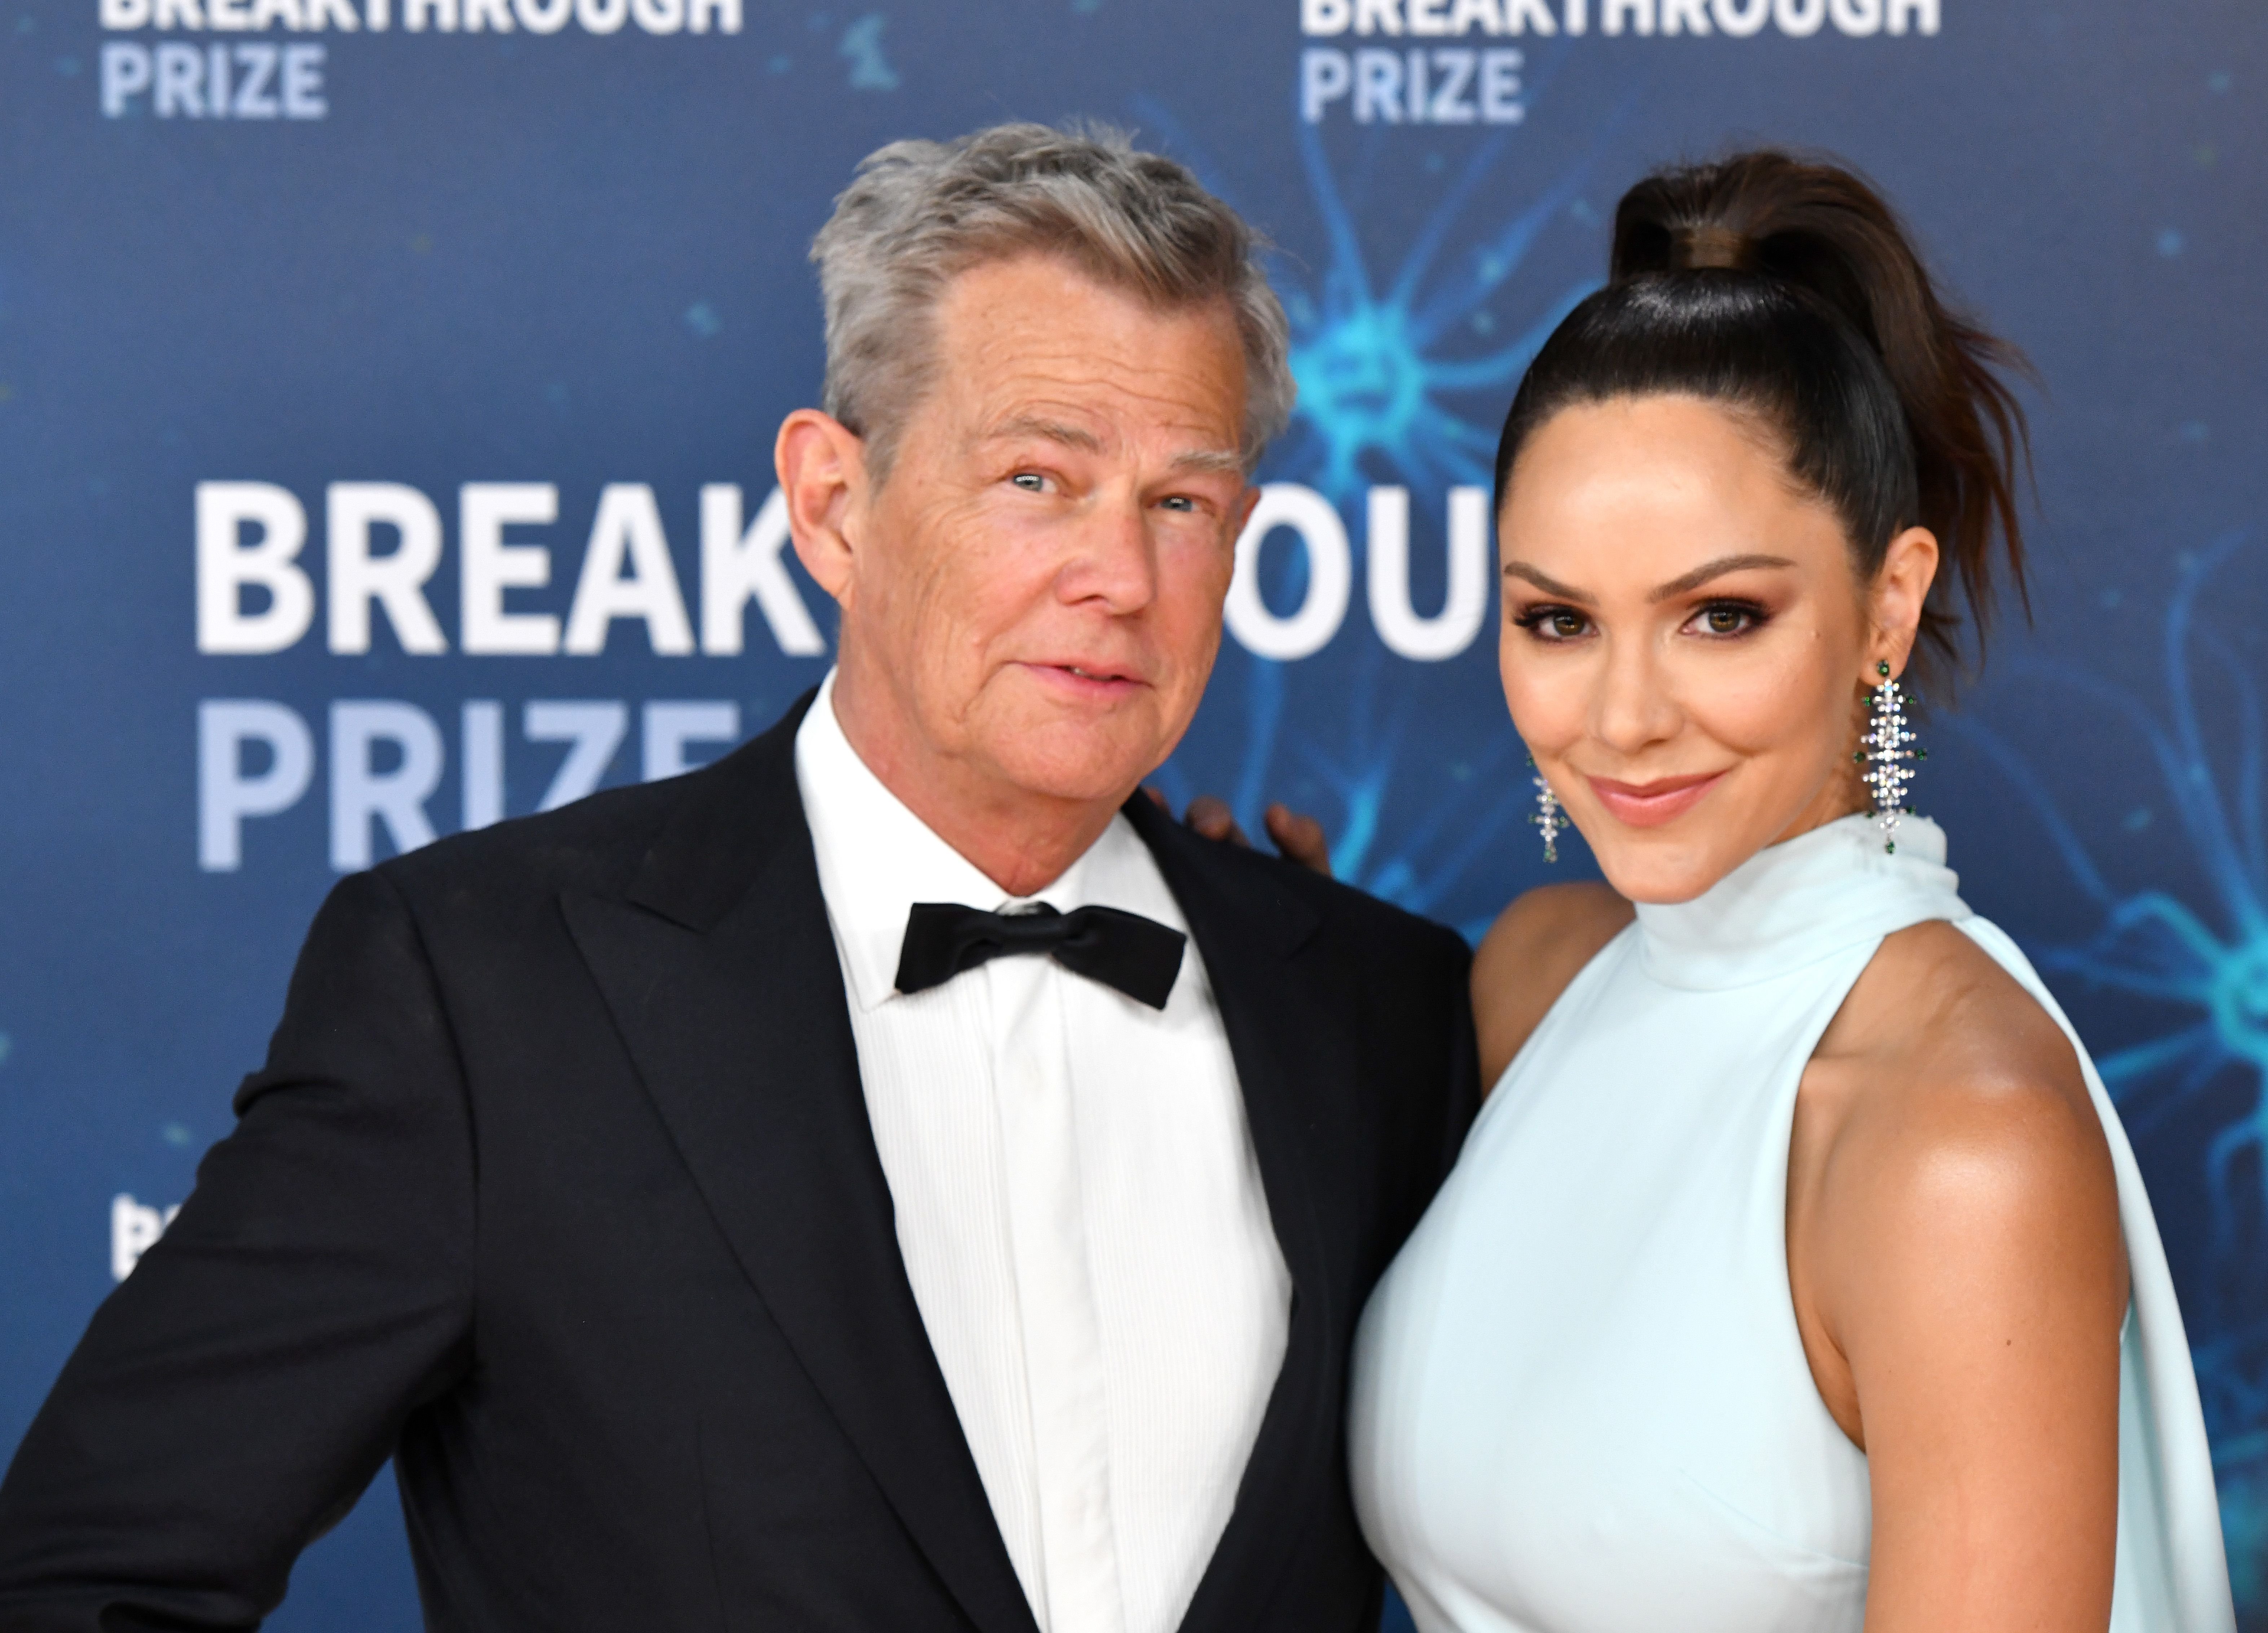 David Foster and Katharine McPhee at the 2020 Breakthrough Prize Red Carpet at NASA Ames Research Center on November 03, 2019 | Photo: Getty Images